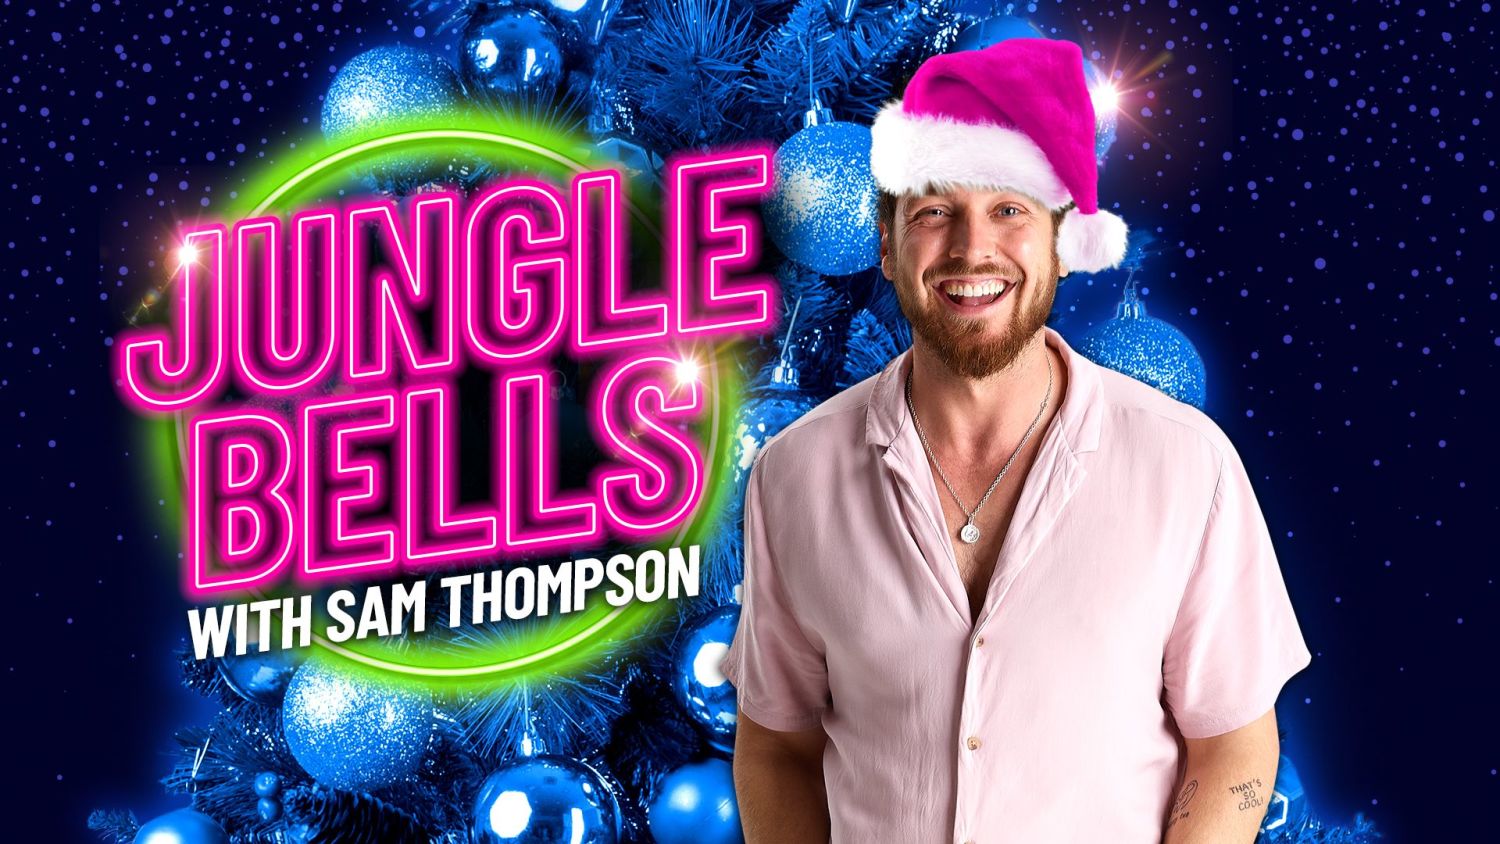 Jungle Bells with Sam Thompson - Latest Episodes - Listen Now on